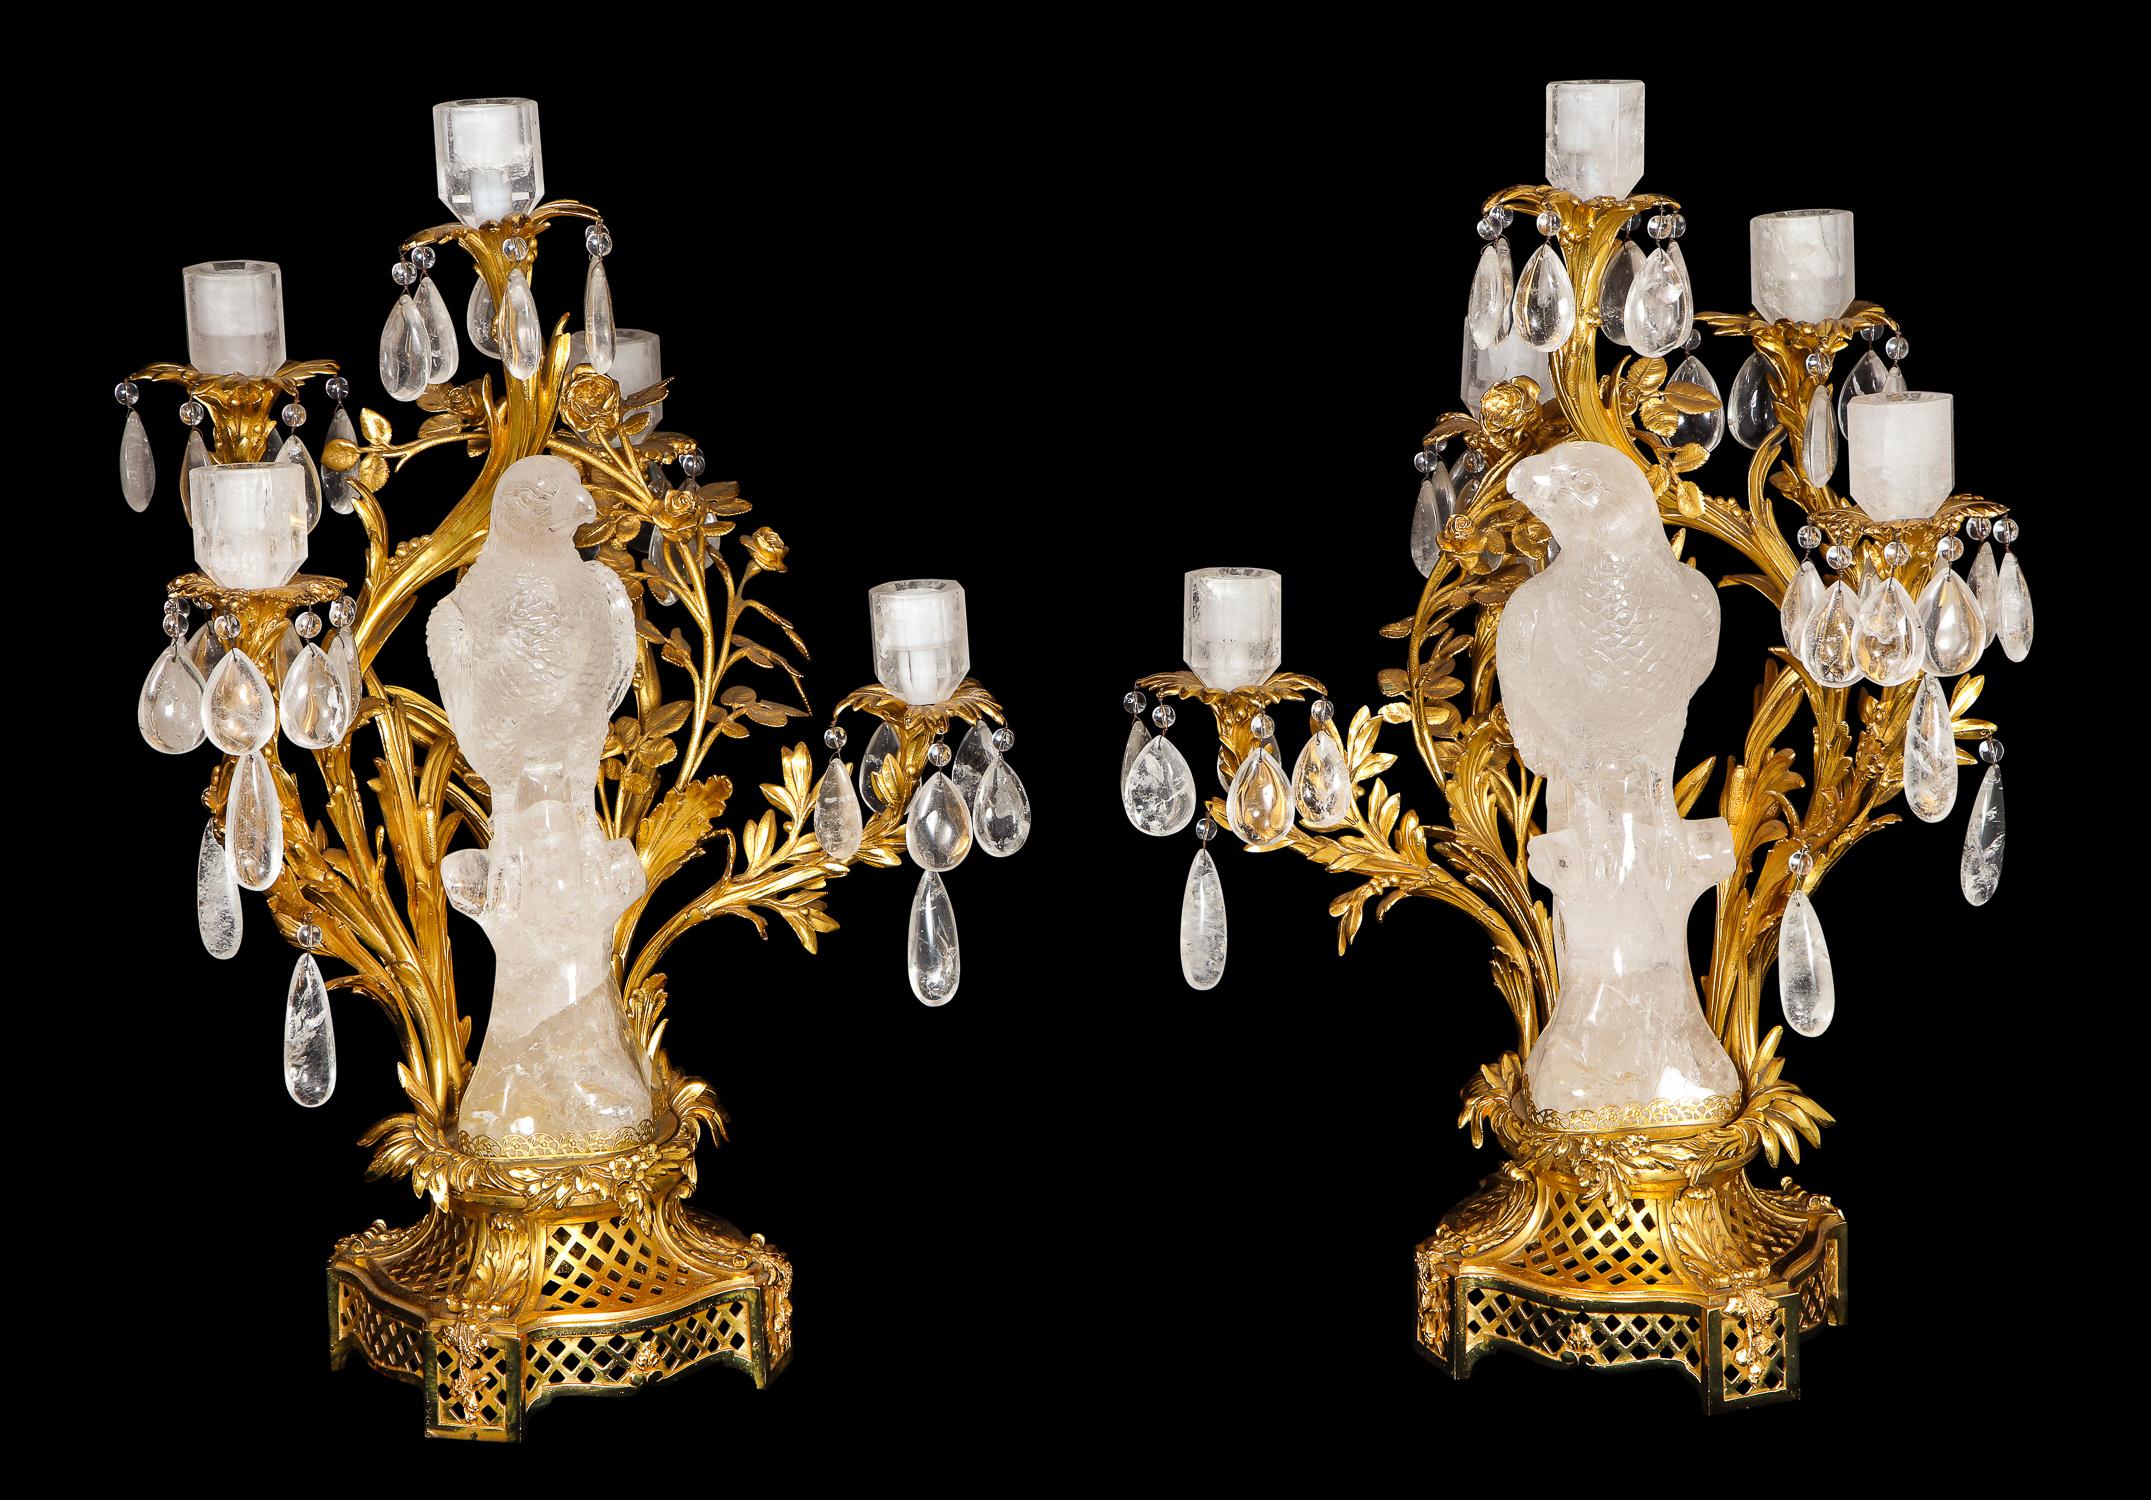 A pair of spectacular and highly important rare antique French Louis XVI style gilt bronze-mounted cut rock crystal parrot candelabras/lamps of exquisite craftsmanship embellished with the most unique hand-carved rock crystal parrots mounted in fine